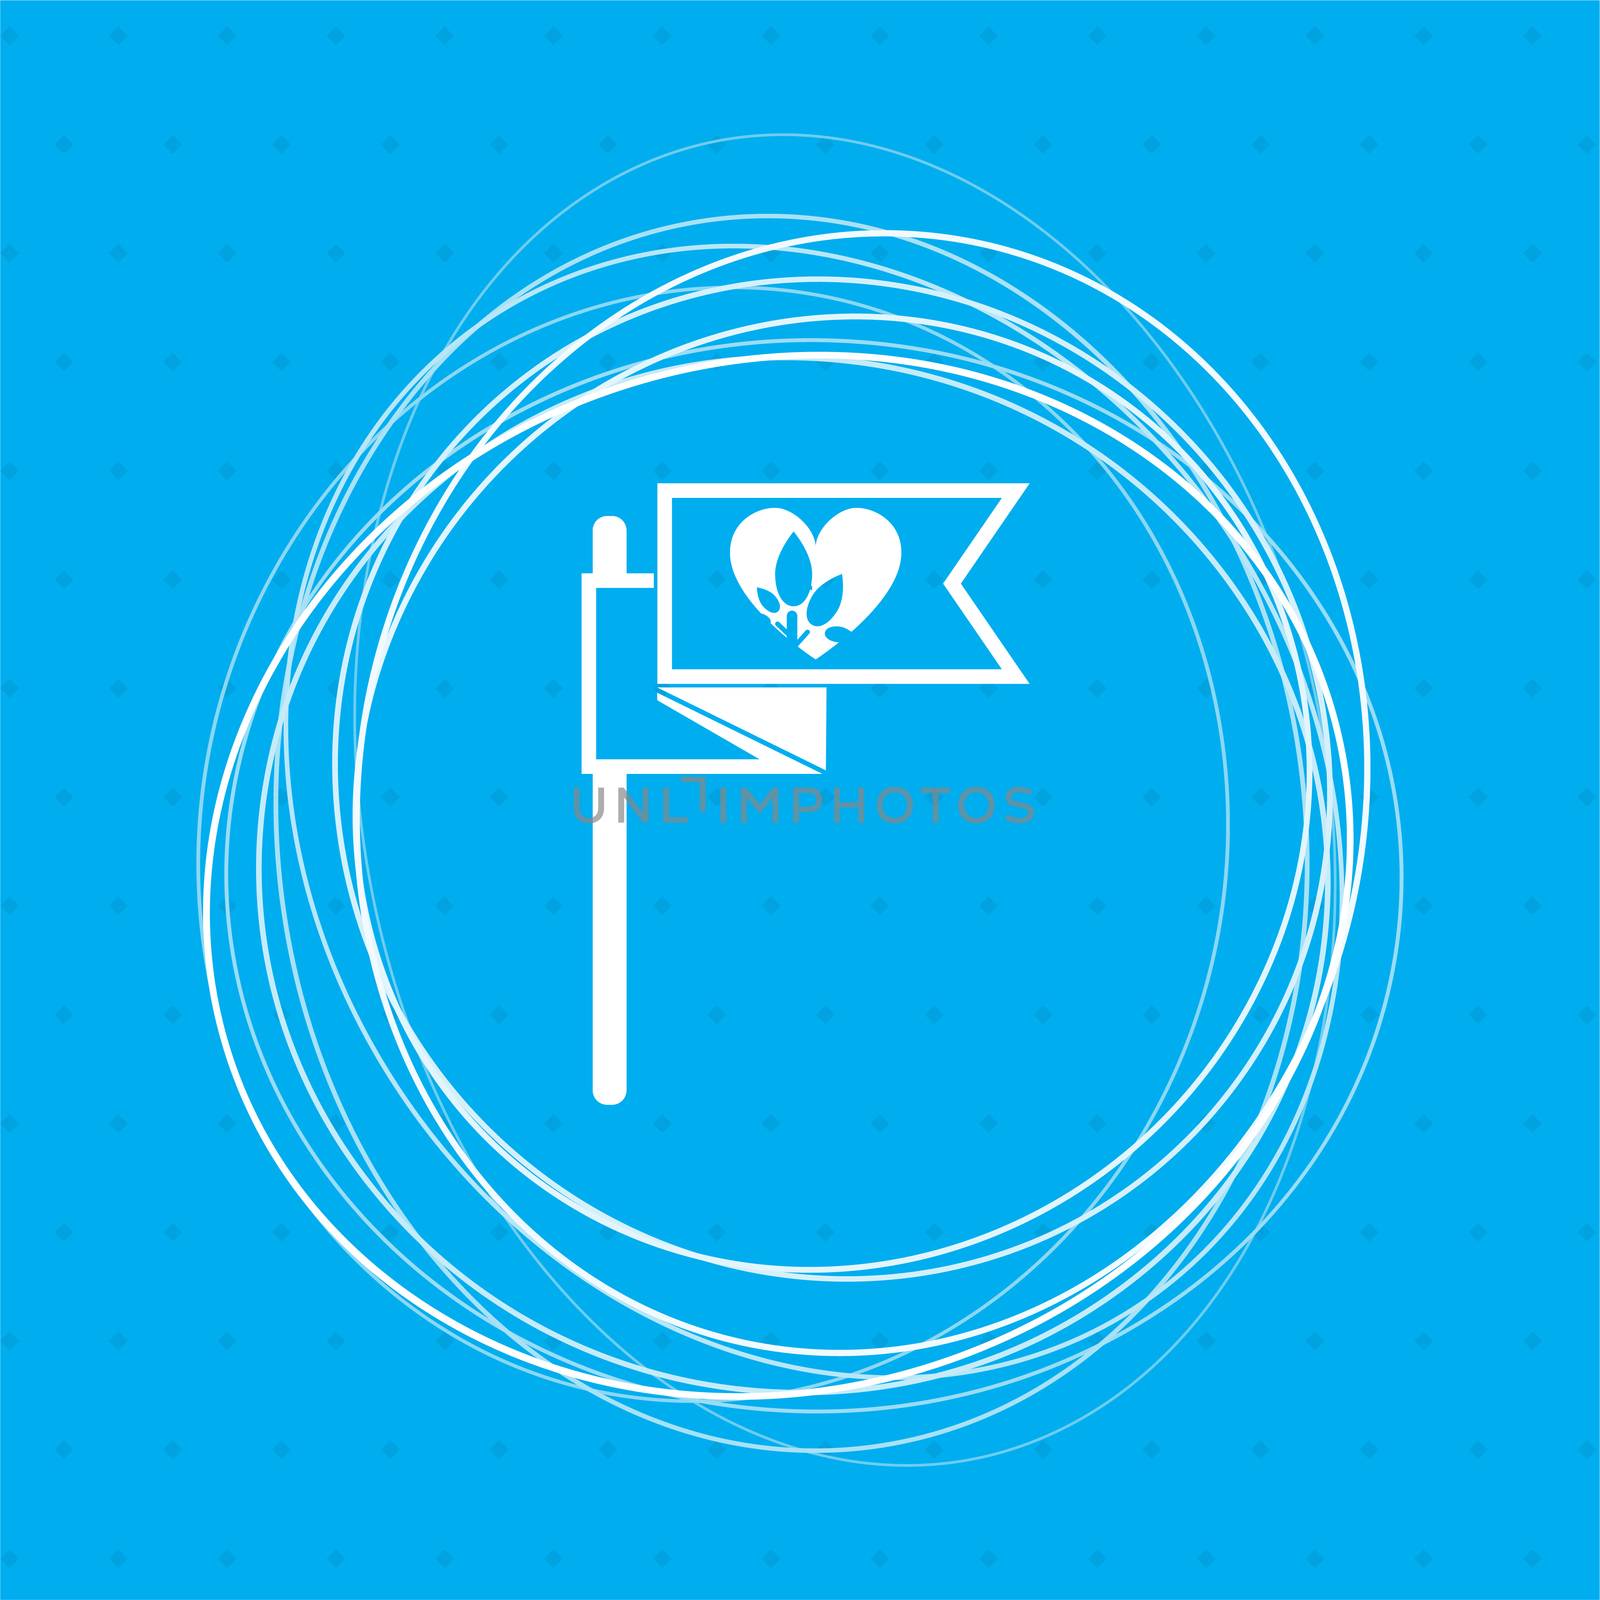 Flag, heart icon on a blue background with abstract circles around and place for your text. illustration